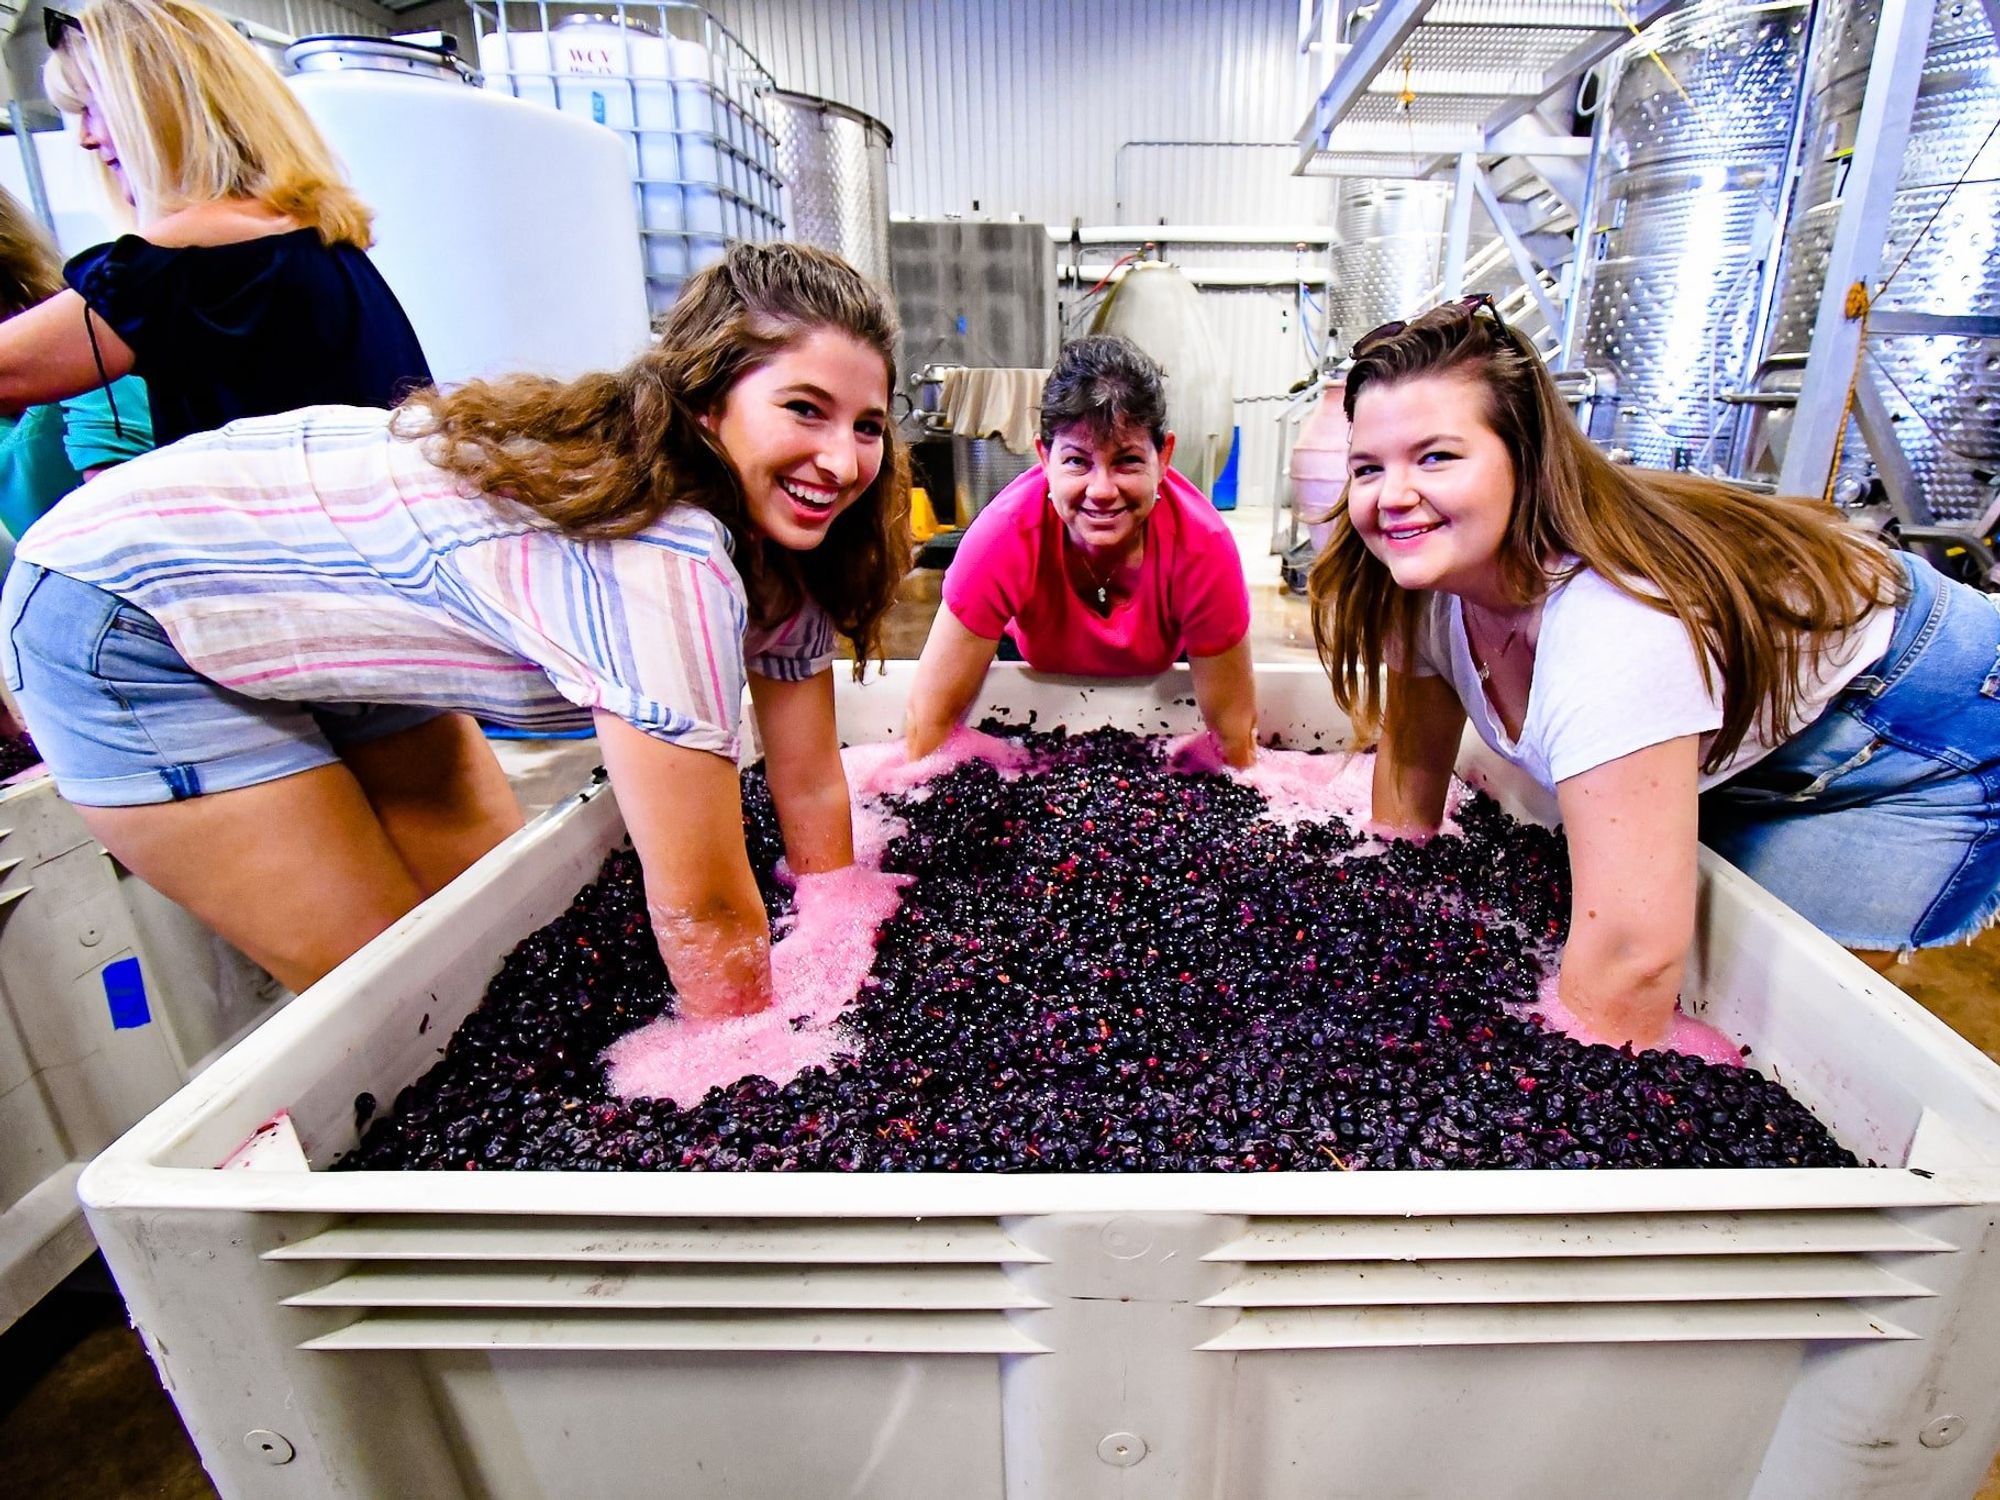 https://austin.culturemap.com/media-library/three-women-dip-their-hands-in-a-container-full-of-grapes.jpg?id=34843987&width=2000&height=1500&quality=85&coordinates=0%2C0%2C228%2C0